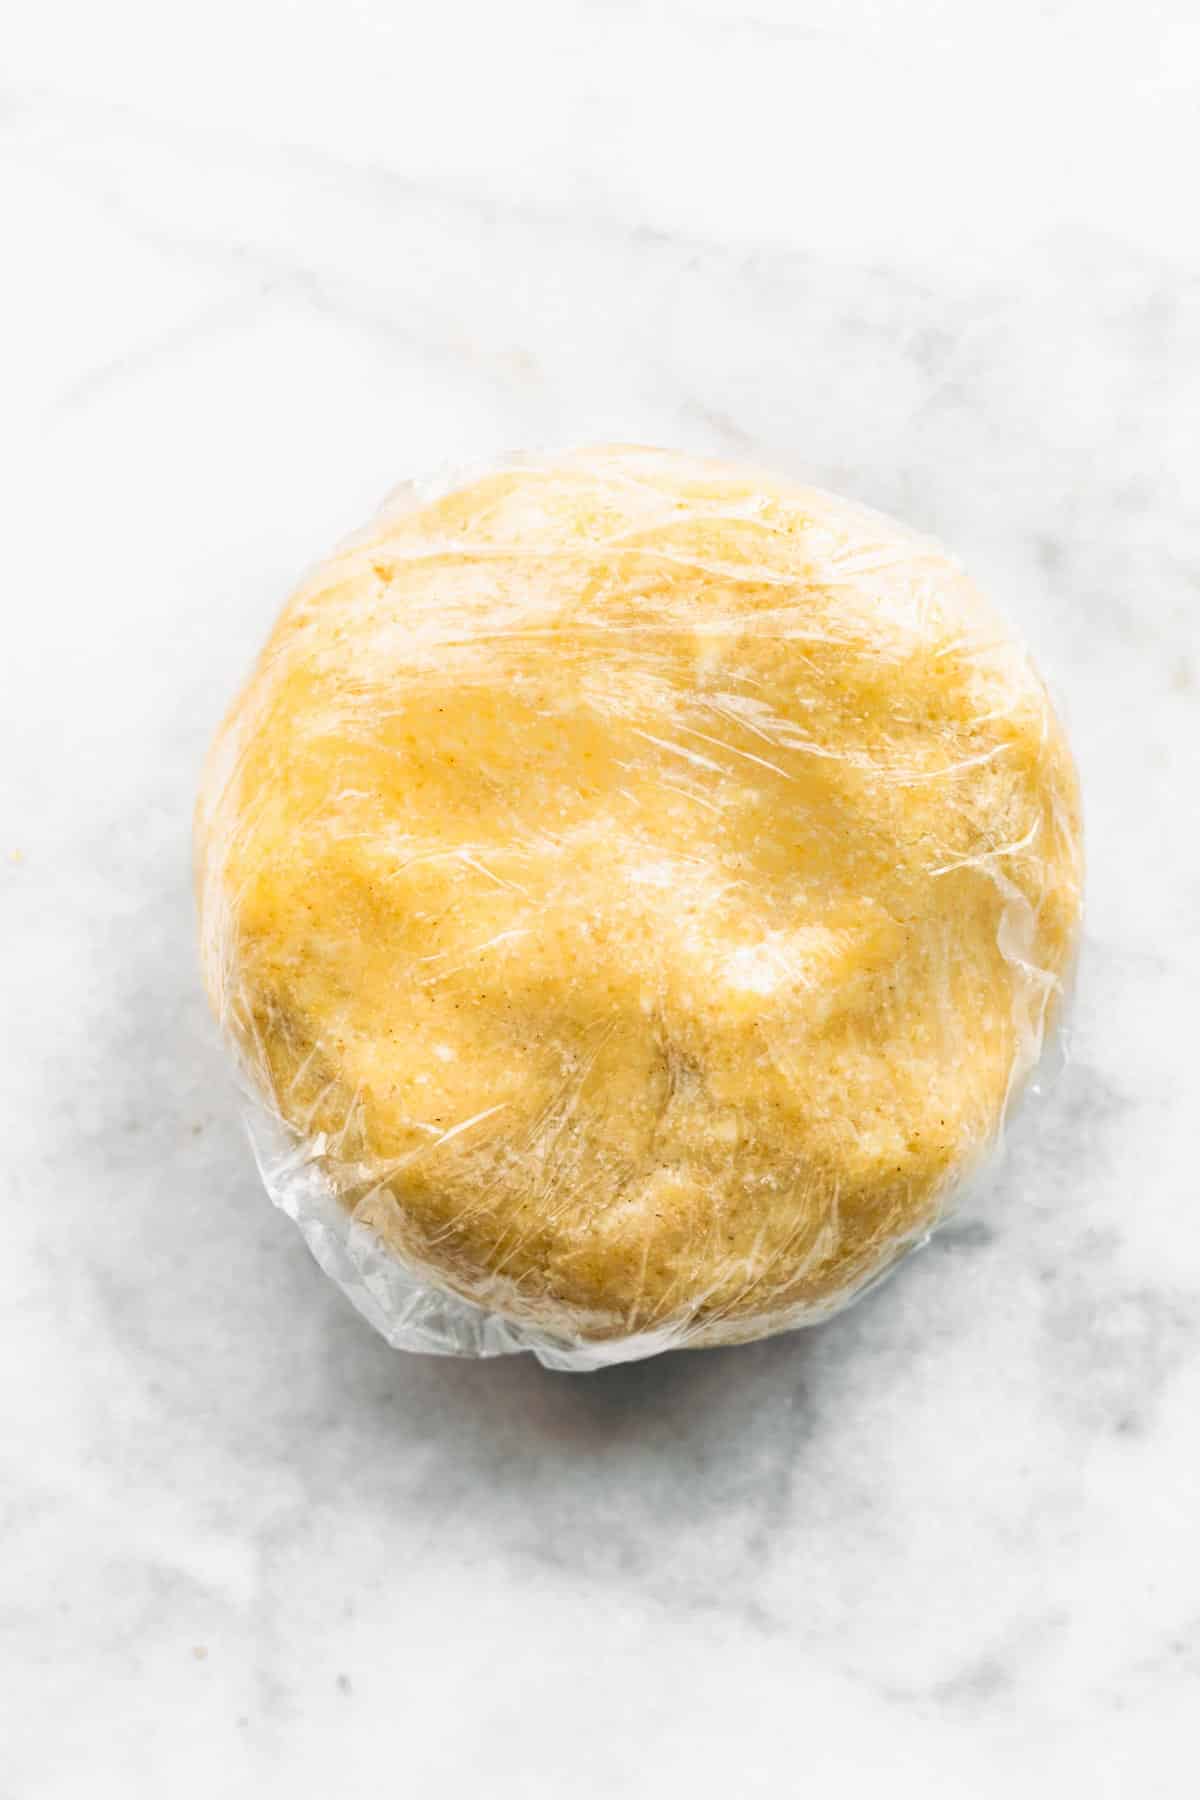 A gluten free pie crust wrapped in plastic wrap on a white marble countertop.